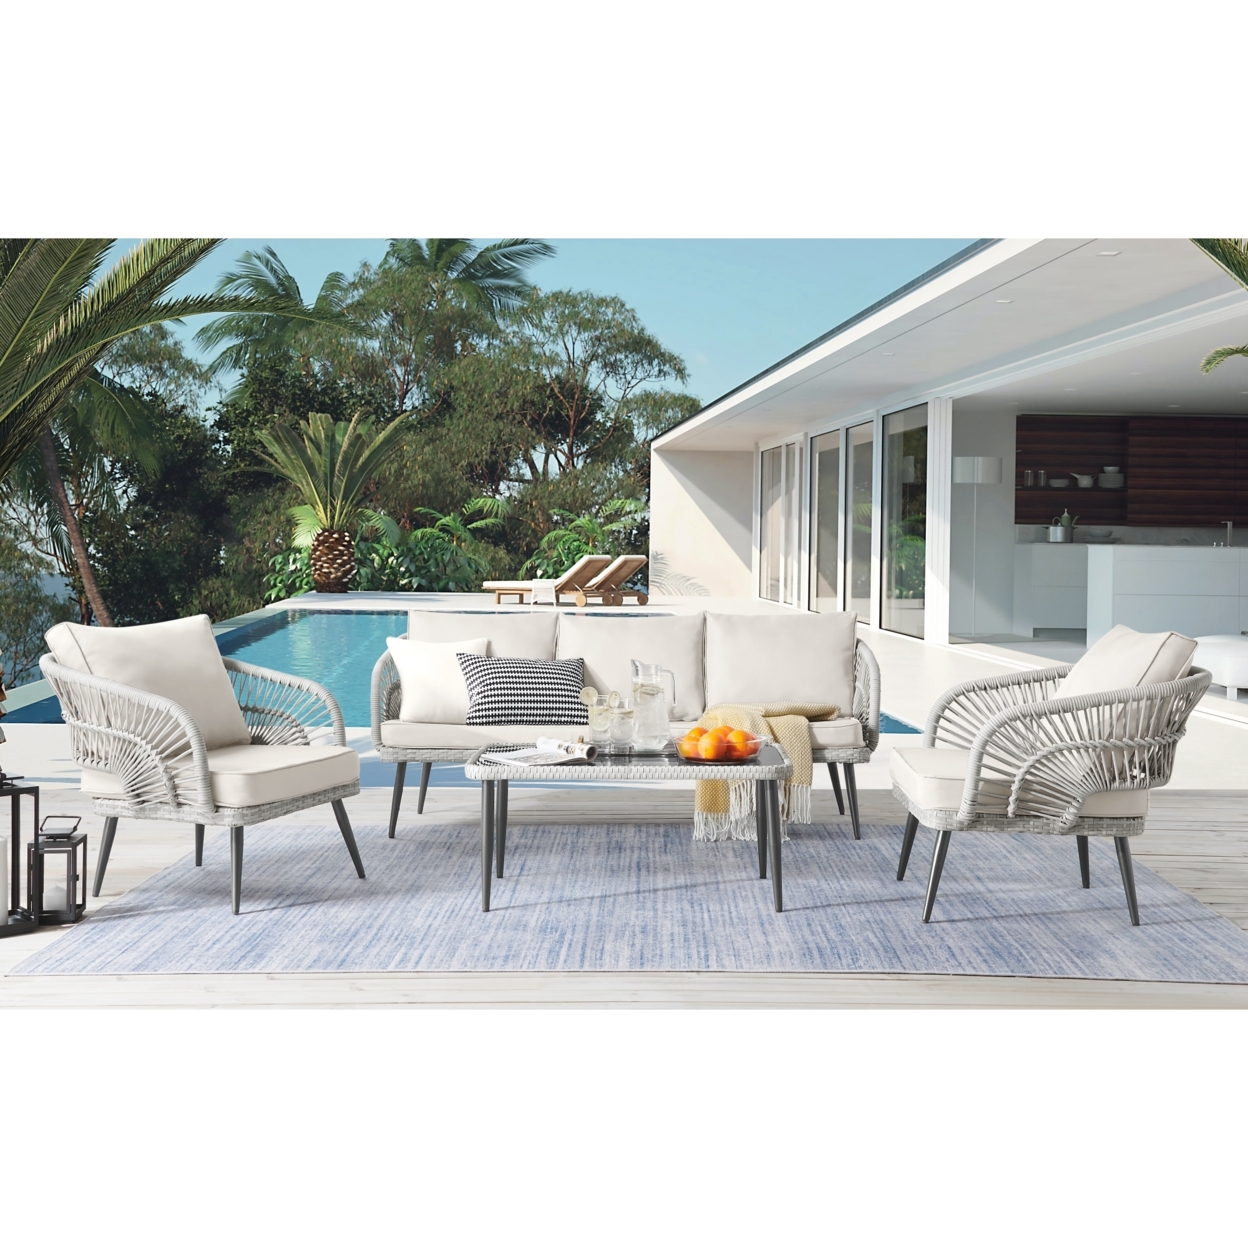 Javien Outdoor Set -All-Weather Faux Rattan Wicker Design, Removable And Washable Cushions - Sand/5 Seating